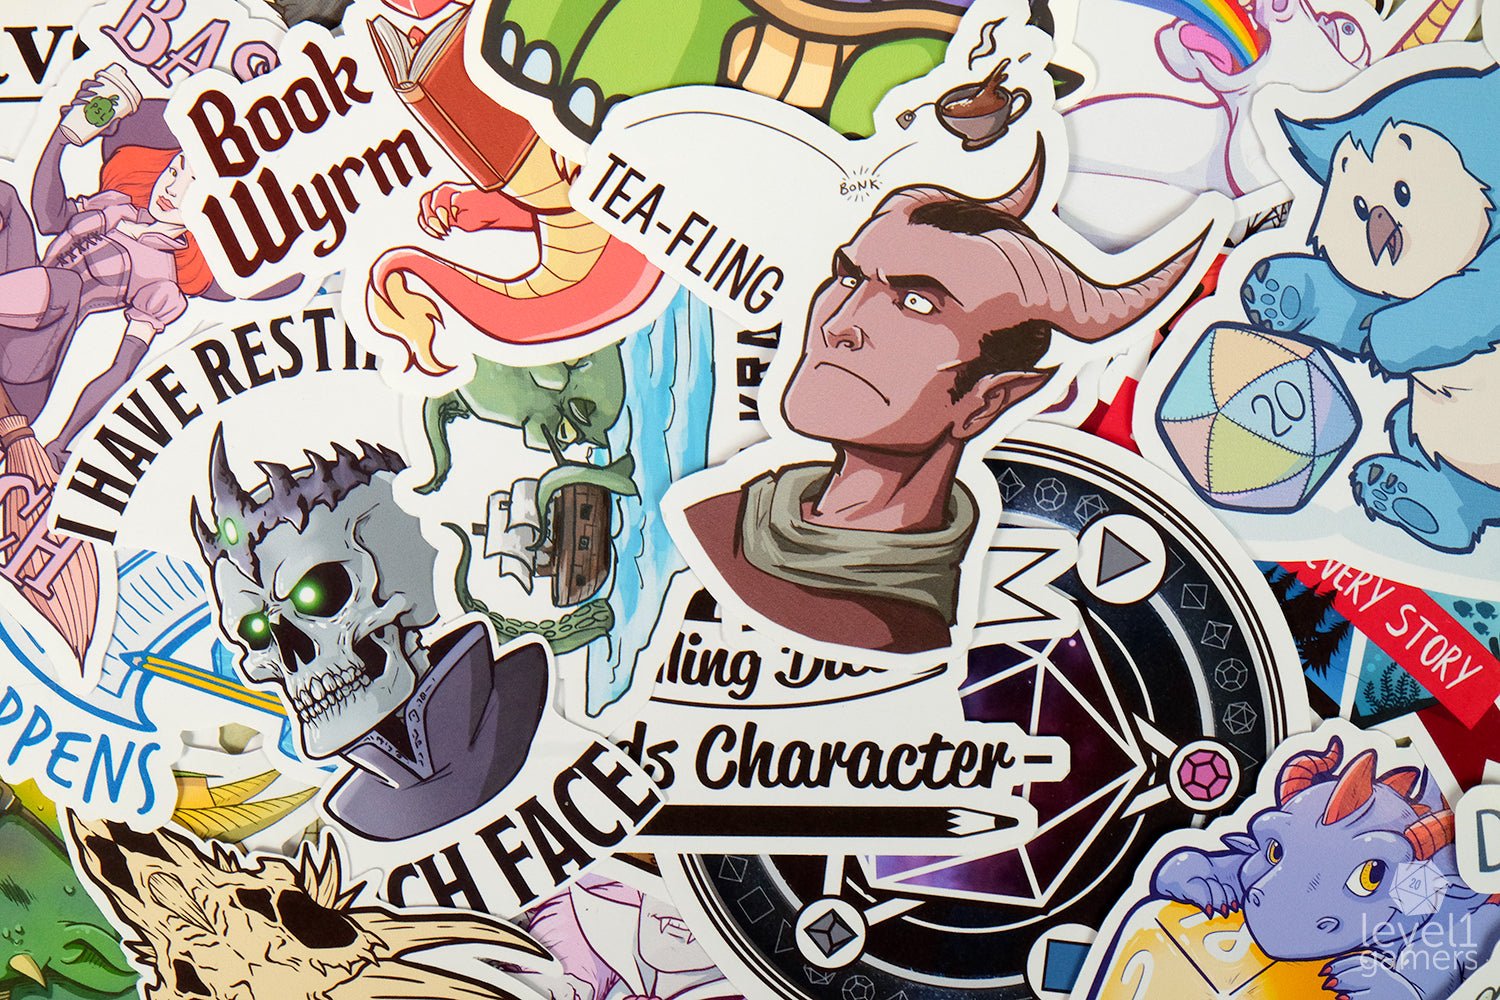 Orc-Ward Sticker  Level 1 Gamers   